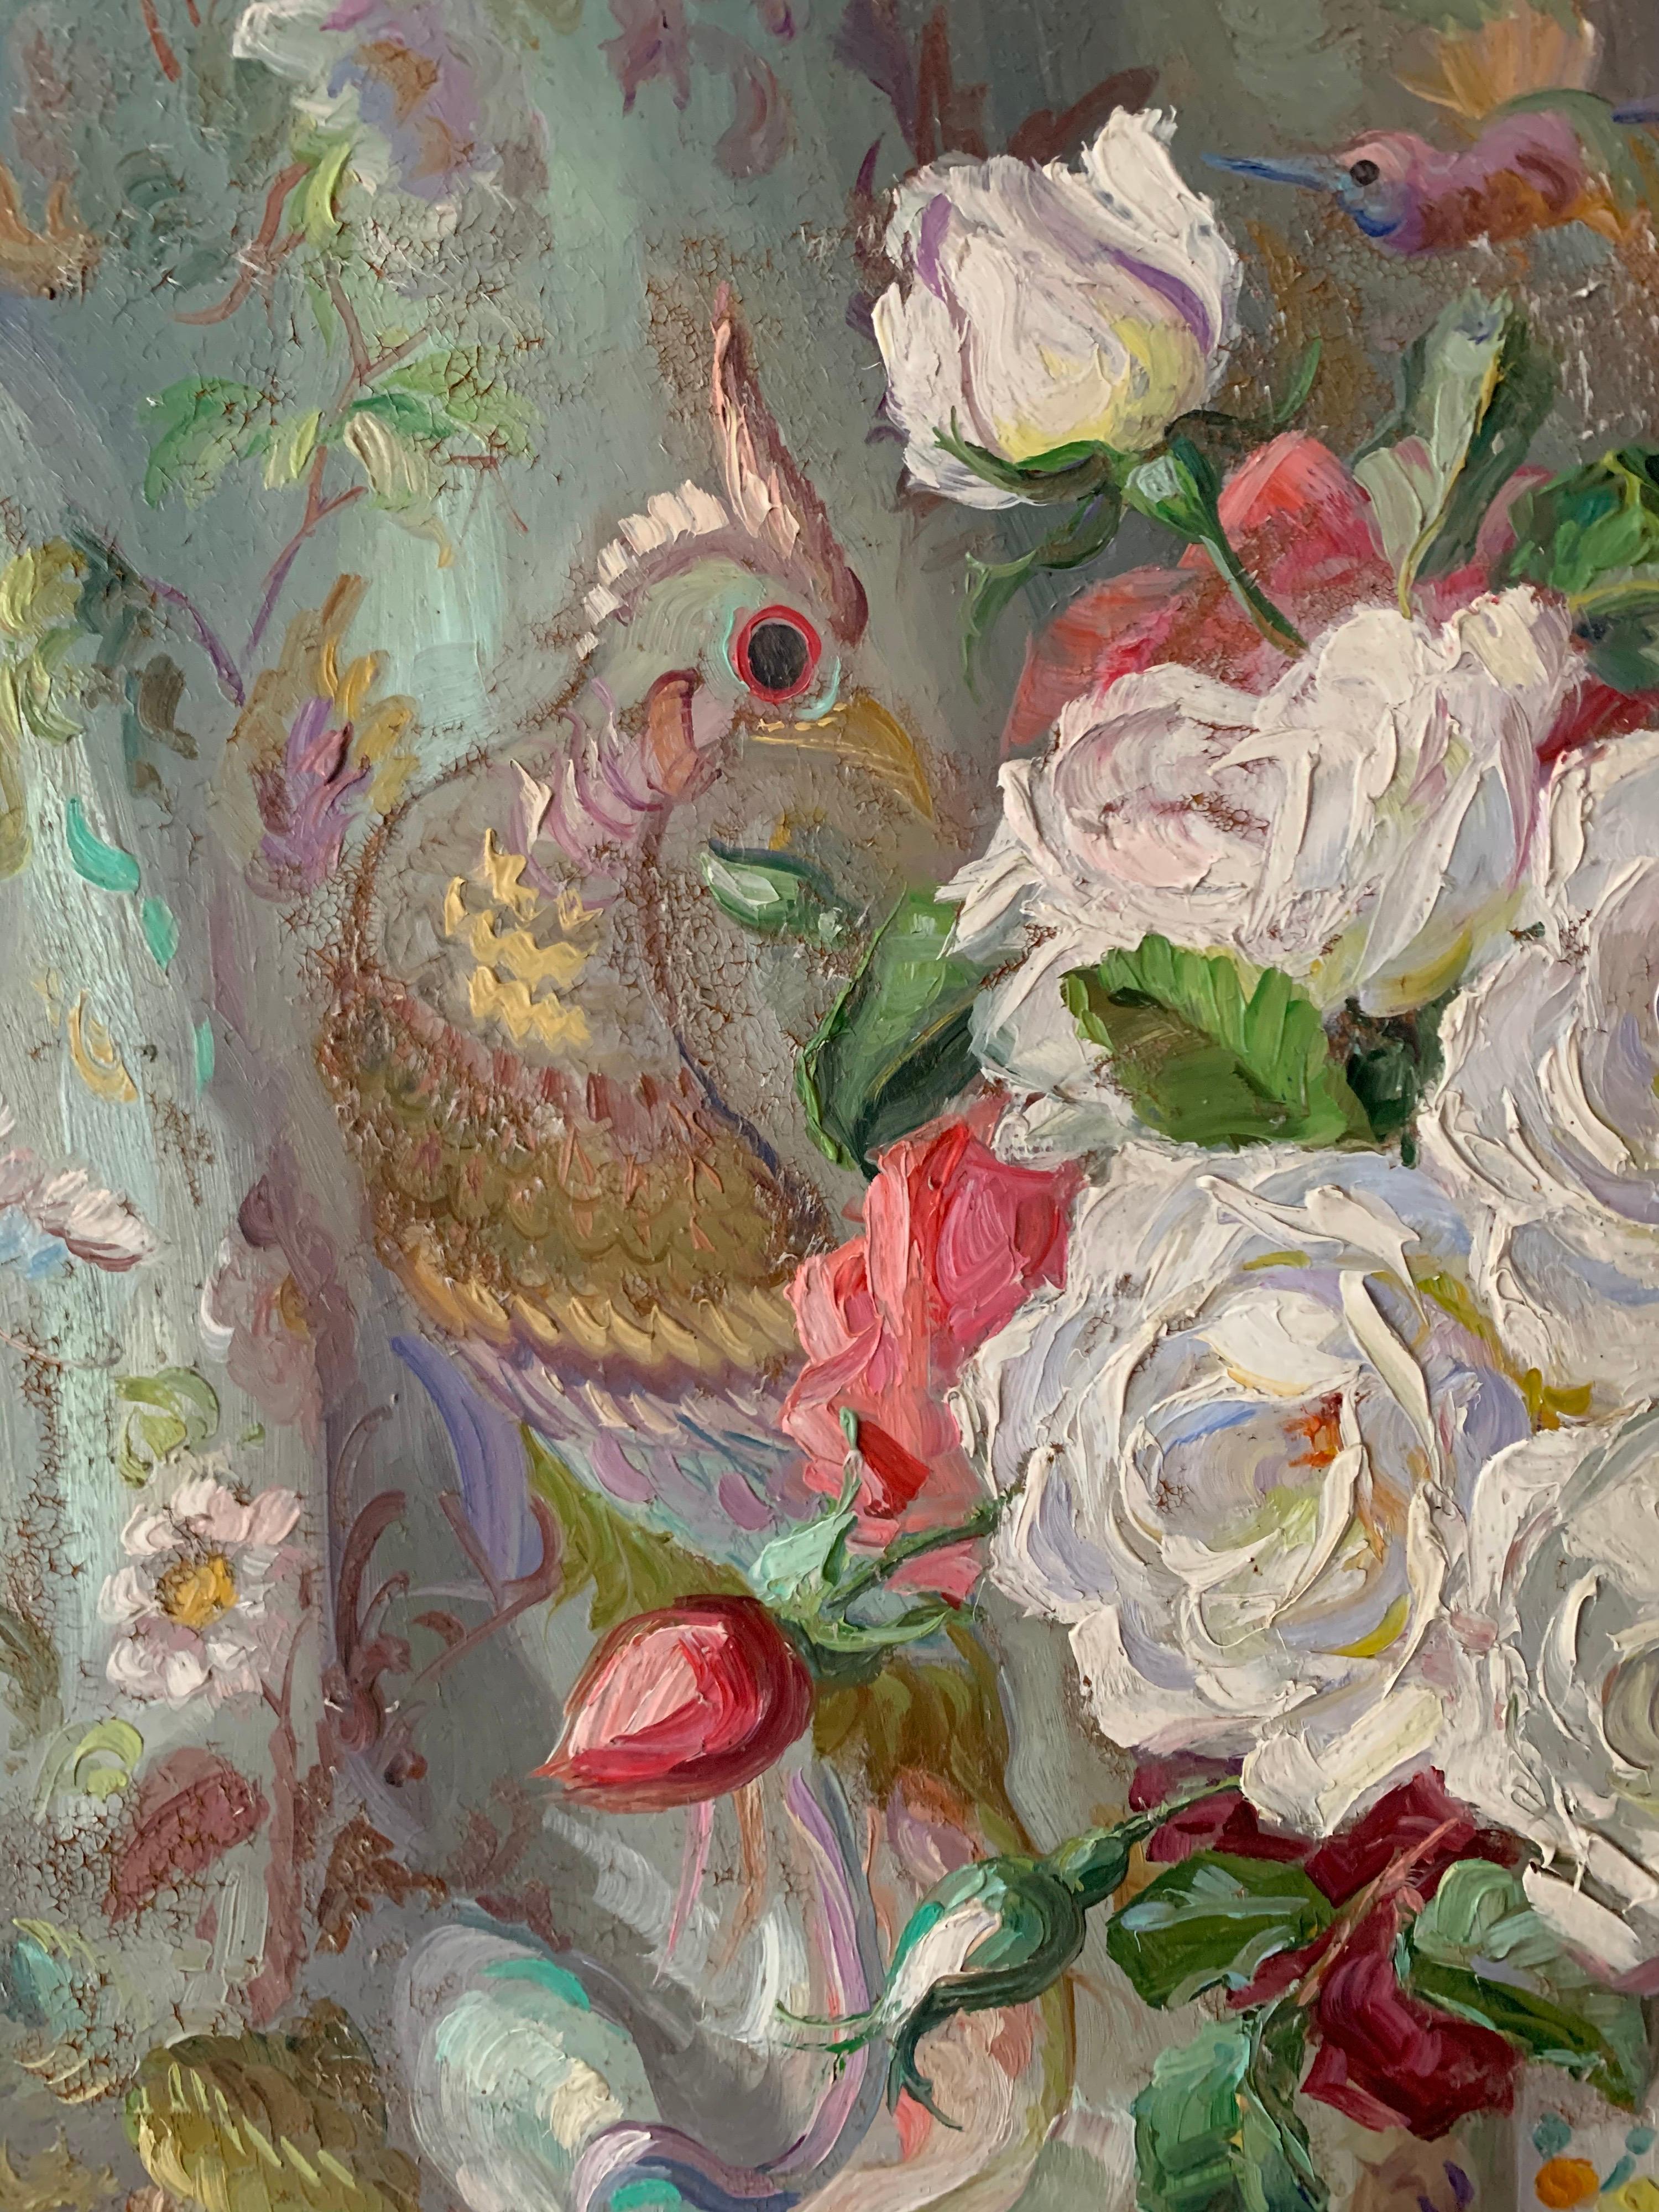 Vintage French Still Life Roses with Chinoiserie Oriental Bird Fabric Signed Oil - Impressionist Painting by Reyne Marin de Pyerne